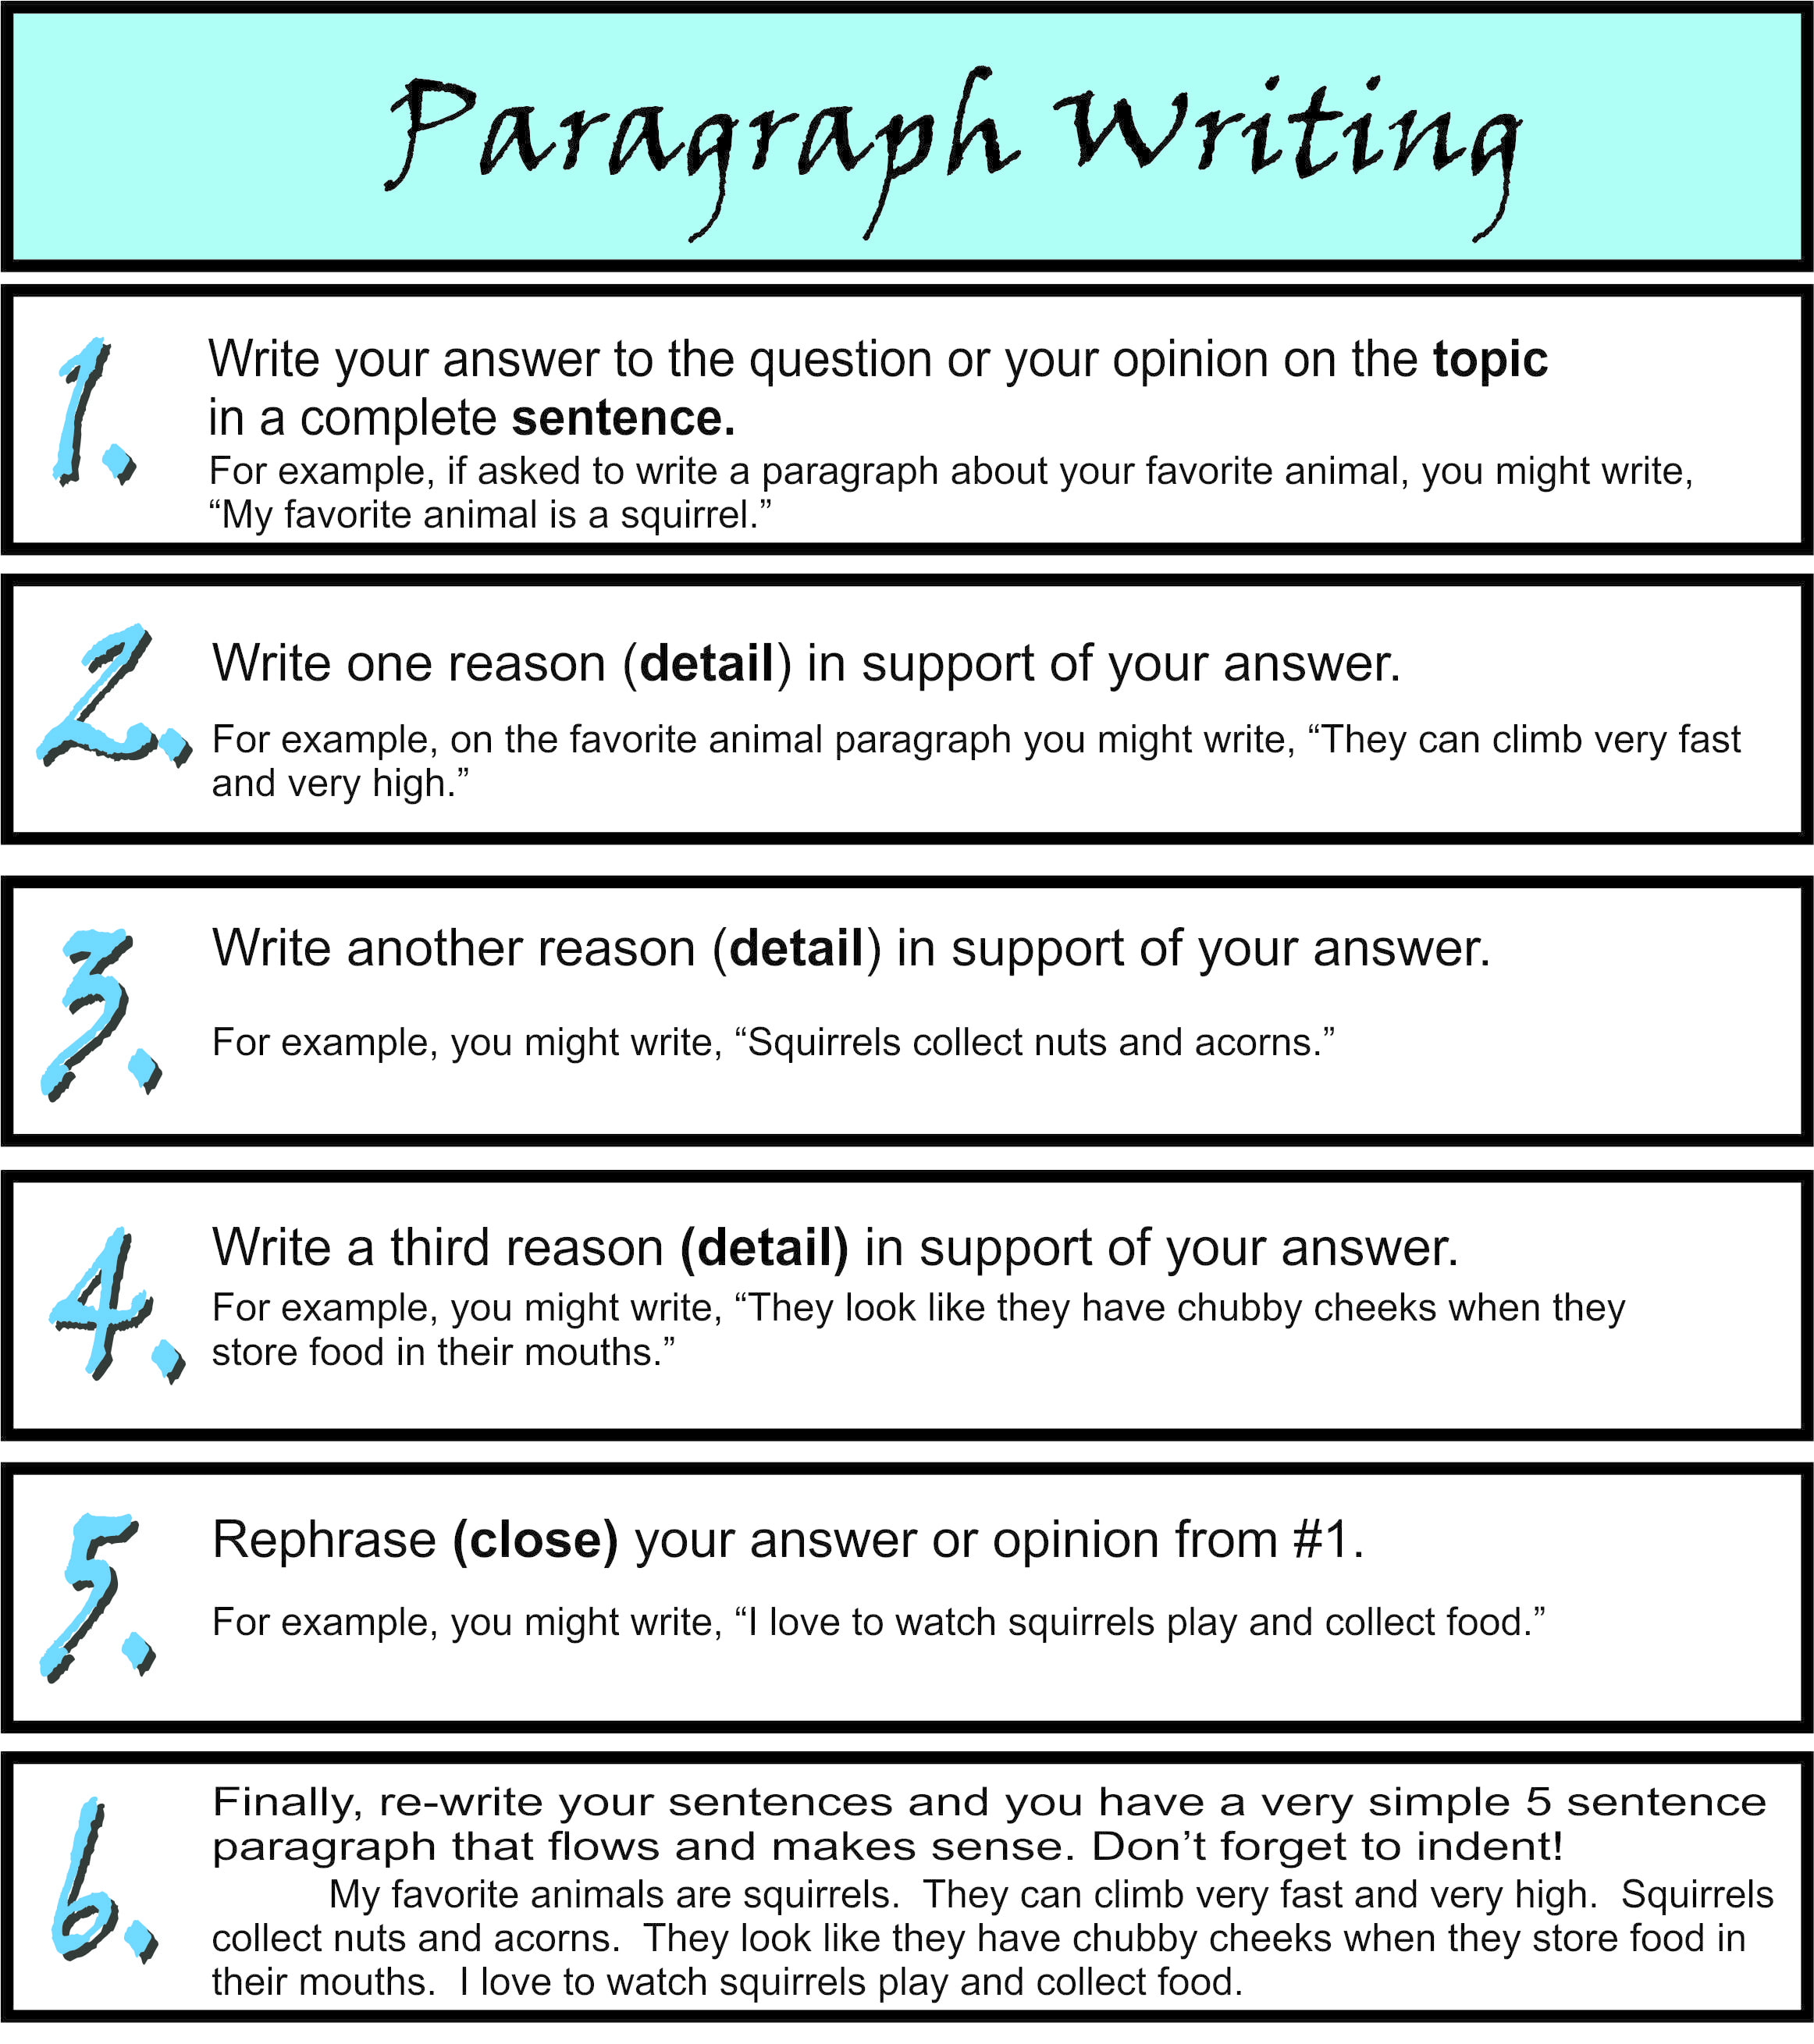 How to write a five paragraph essay